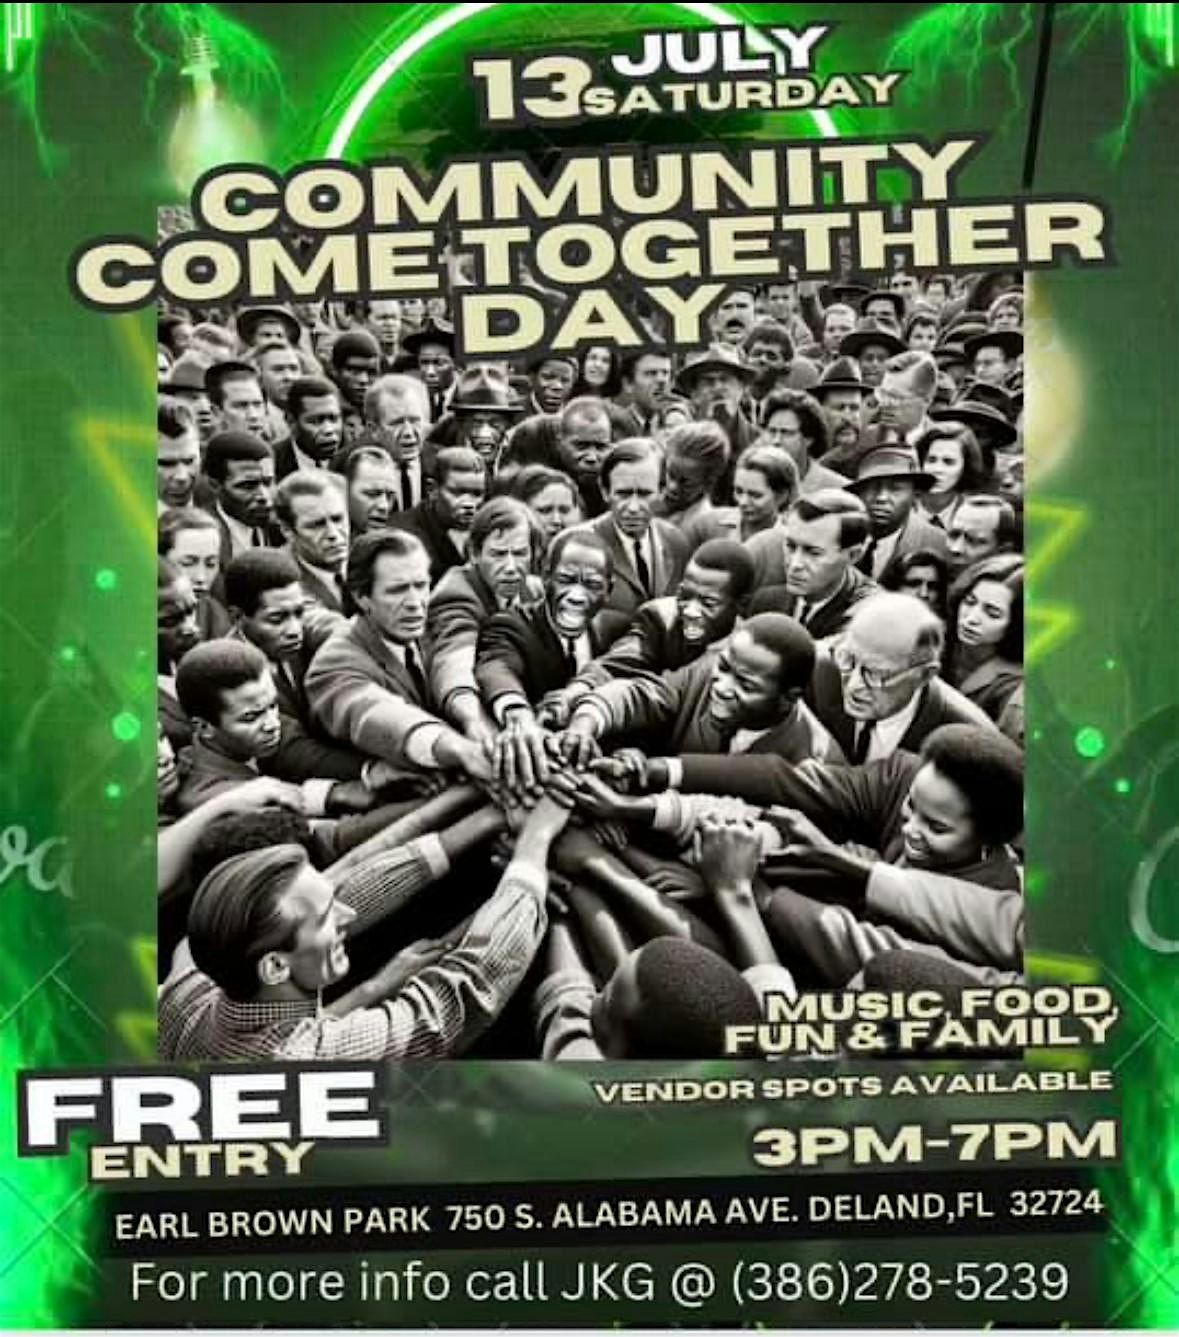 Community come together day